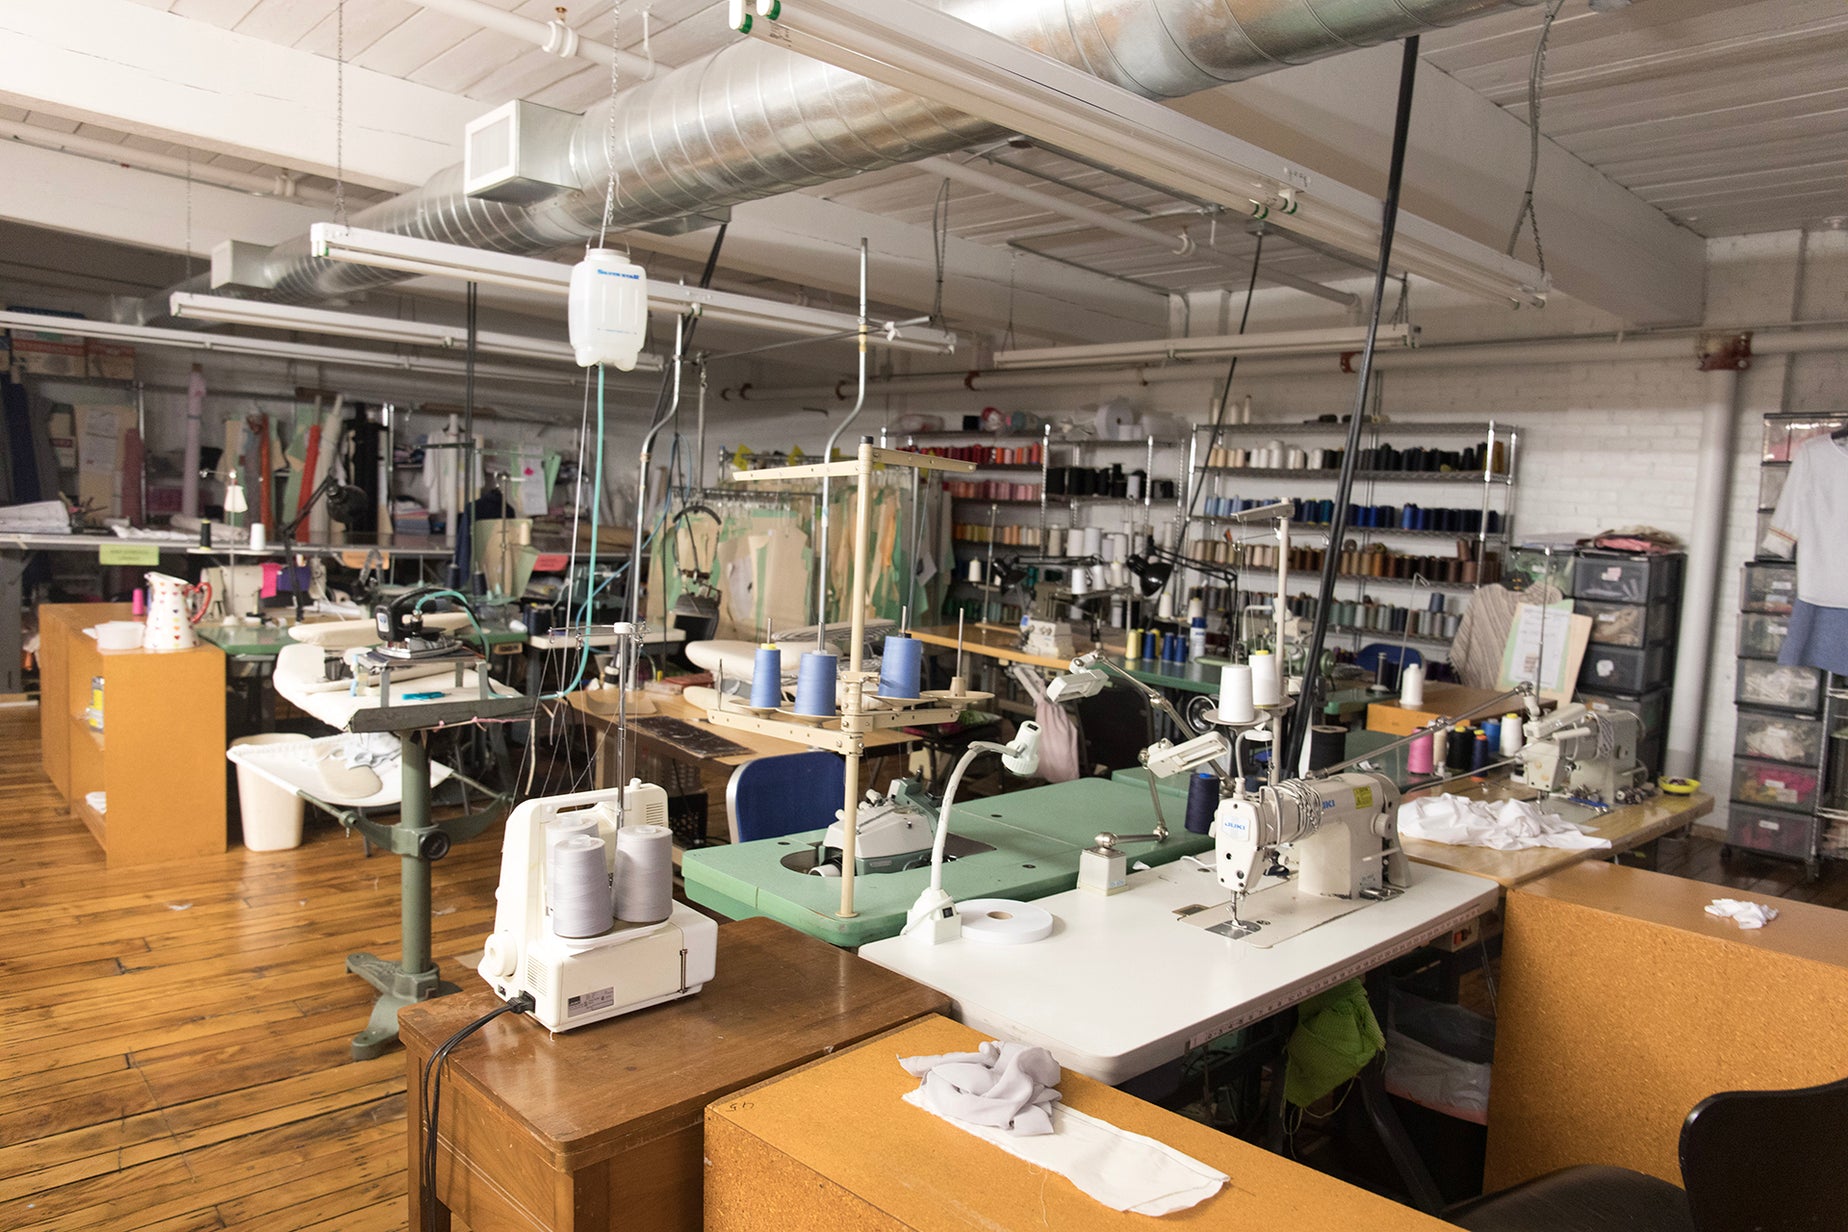 A glimpse inside the Sara Campbell sample shop in Boston.